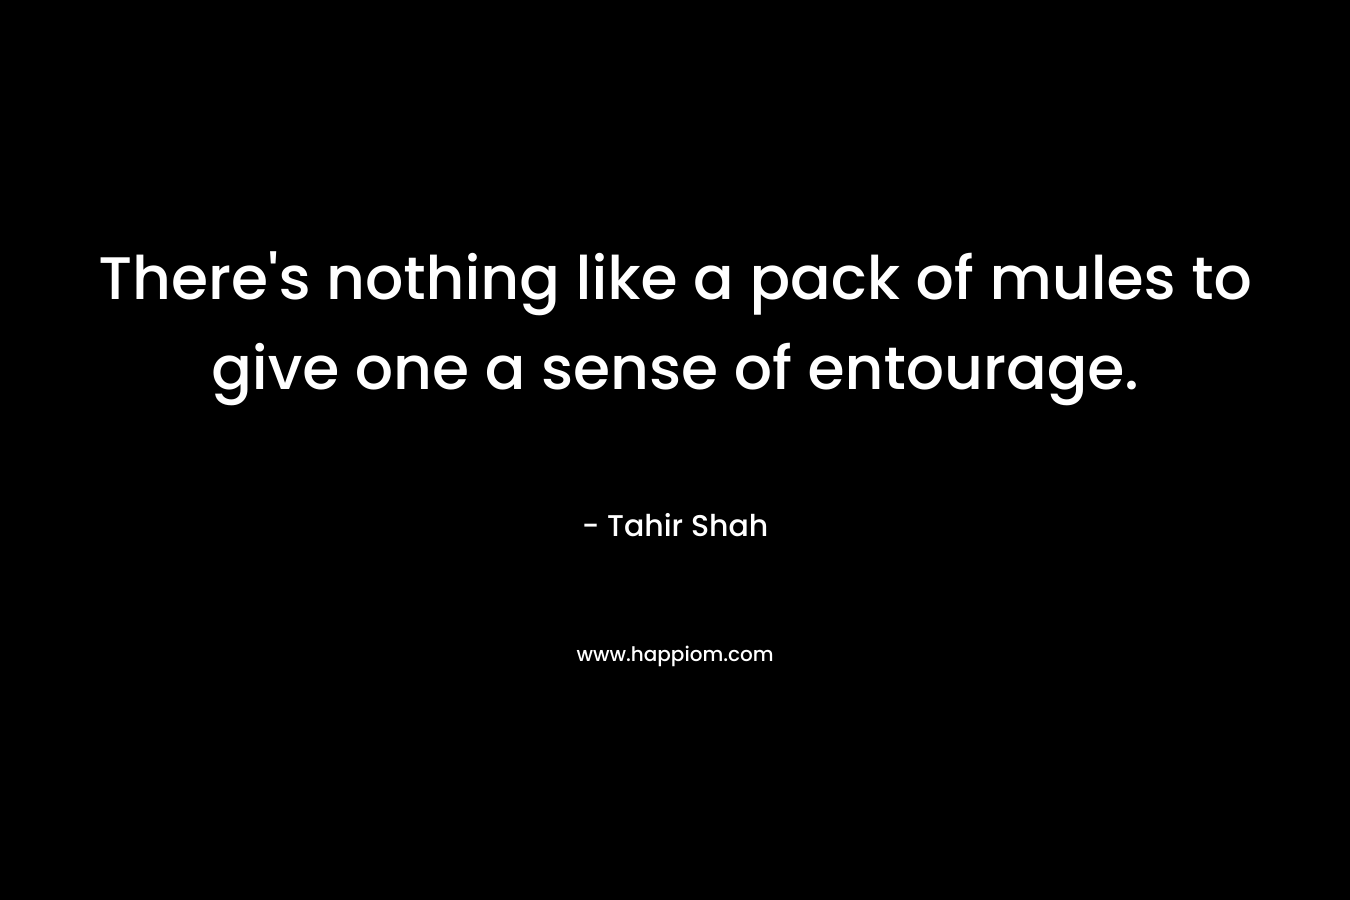 There’s nothing like a pack of mules to give one a sense of entourage. – Tahir Shah